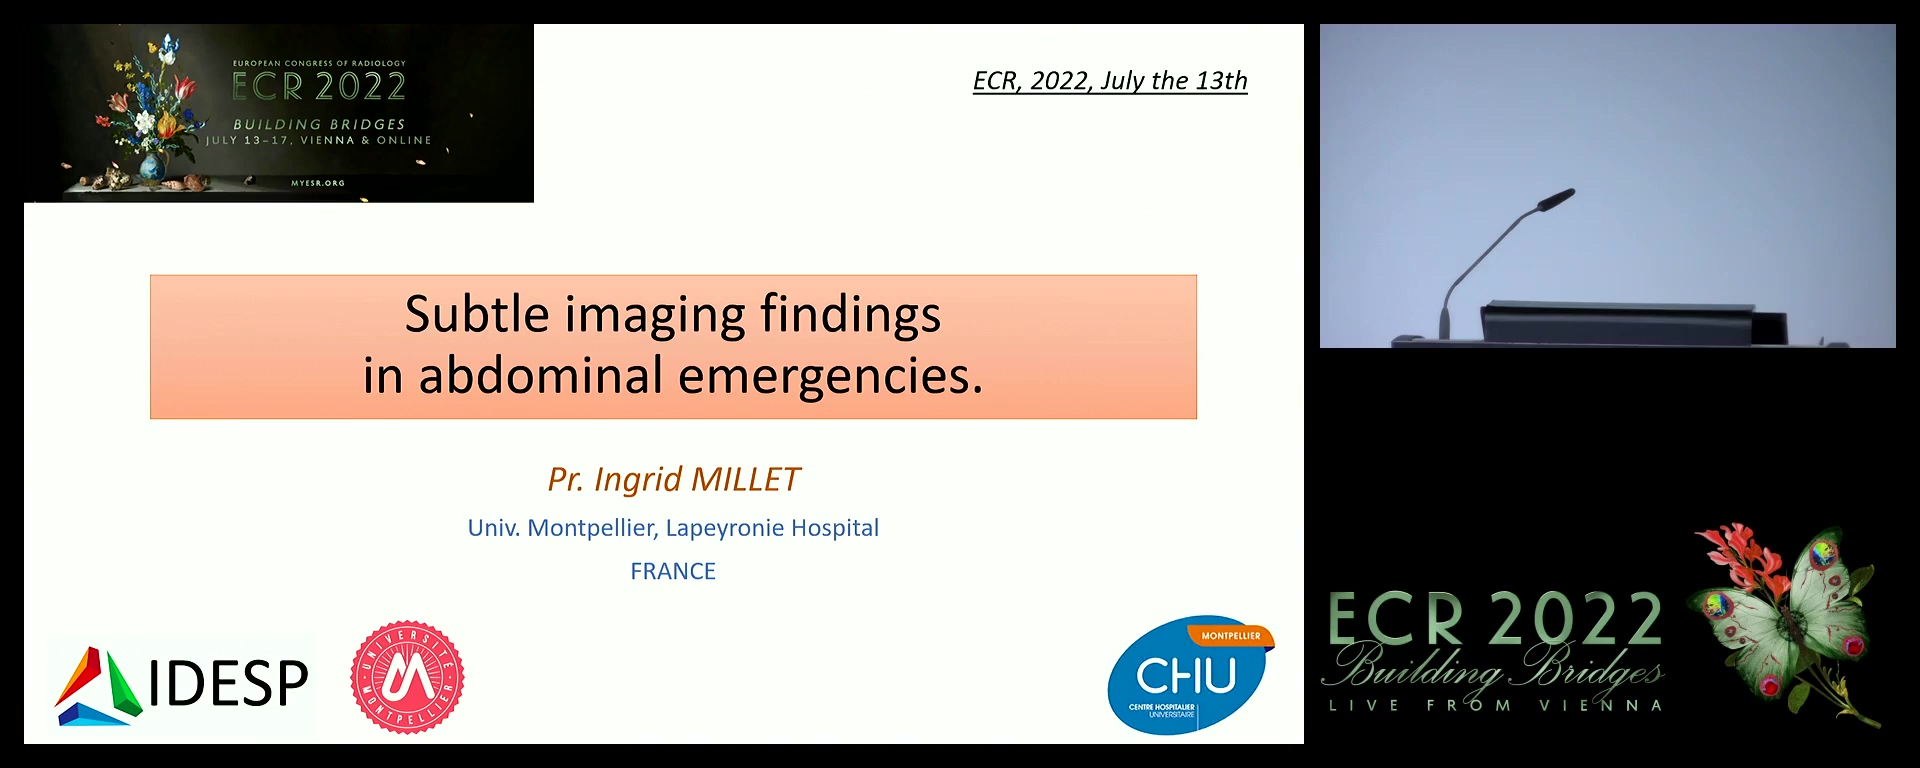 Panel discussion: Which subtle imaging findings are helpful and how can imaging protocols be optimised?